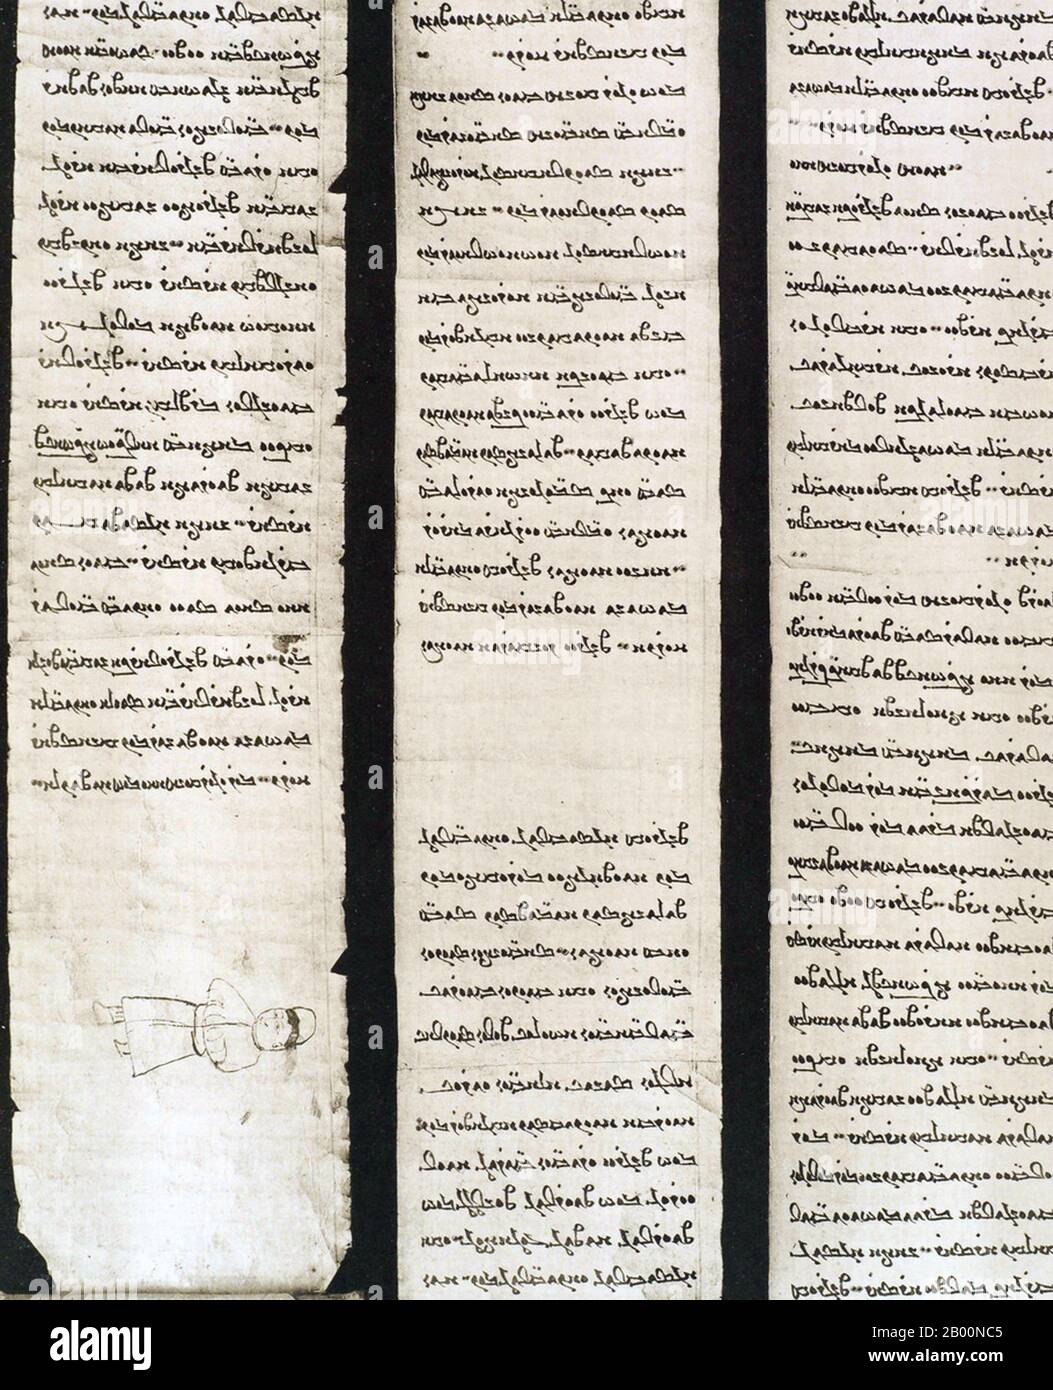 China: Manichaean text. Turkish written in Manichaean. Dunhuang. Sir Marc Aurel Stein (1862-1943).  Manichaeism was one of the major Iranian Gnostic religions, originating in Sassanid Persia. Although most of the original writings of the founding prophet Mani (c. 216–276 CE) have been lost, numerous translations and fragmentary texts have survived.  Manichaeism taught an elaborate cosmology describing the struggle between a good, spiritual world of light, and an evil, material world of darkness. Stock Photo